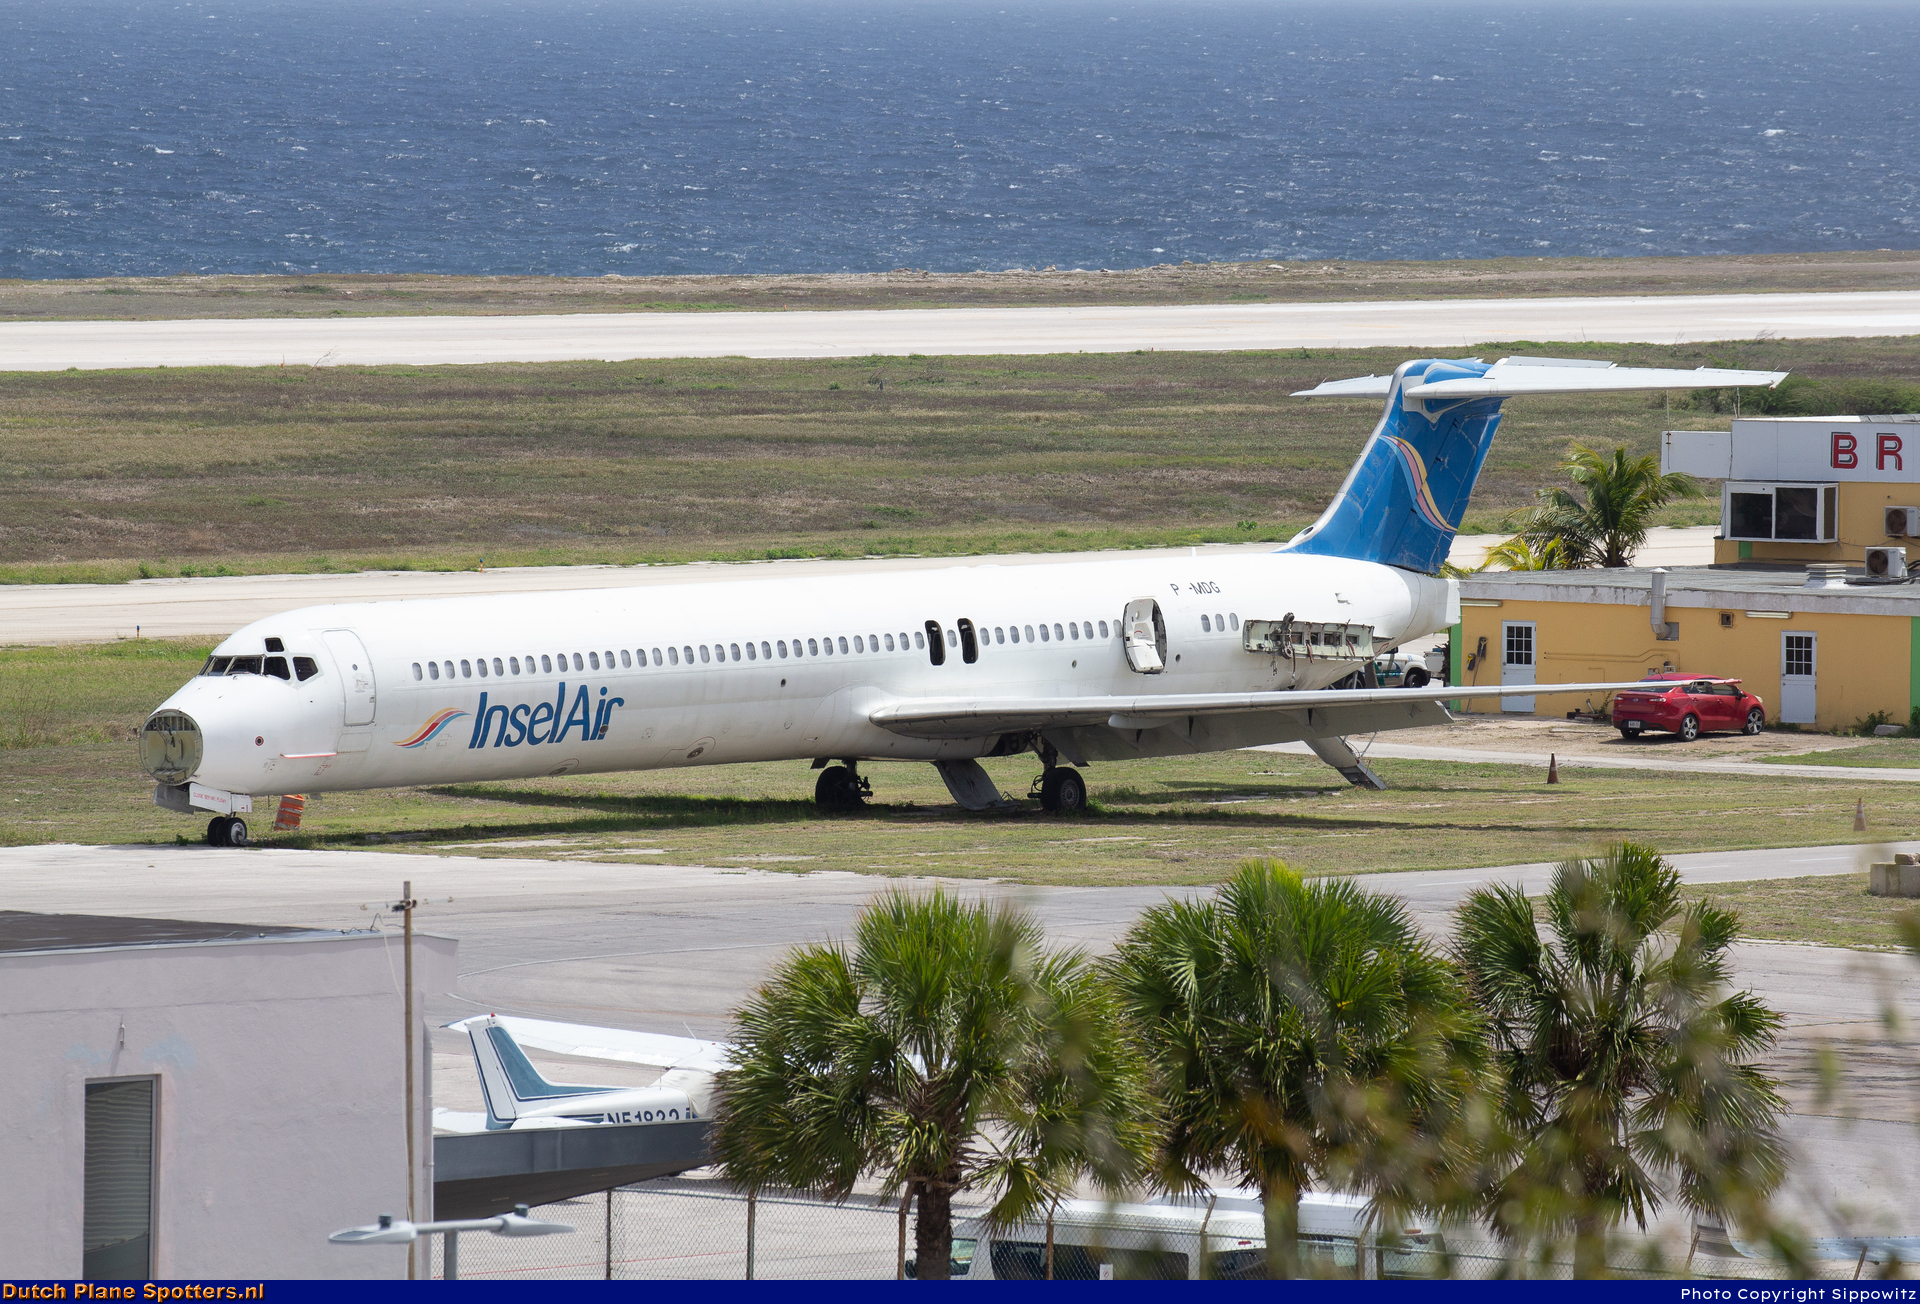 P4-MDG McDonell Douglas MD-83 Insel Air Aruba by Sippowitz